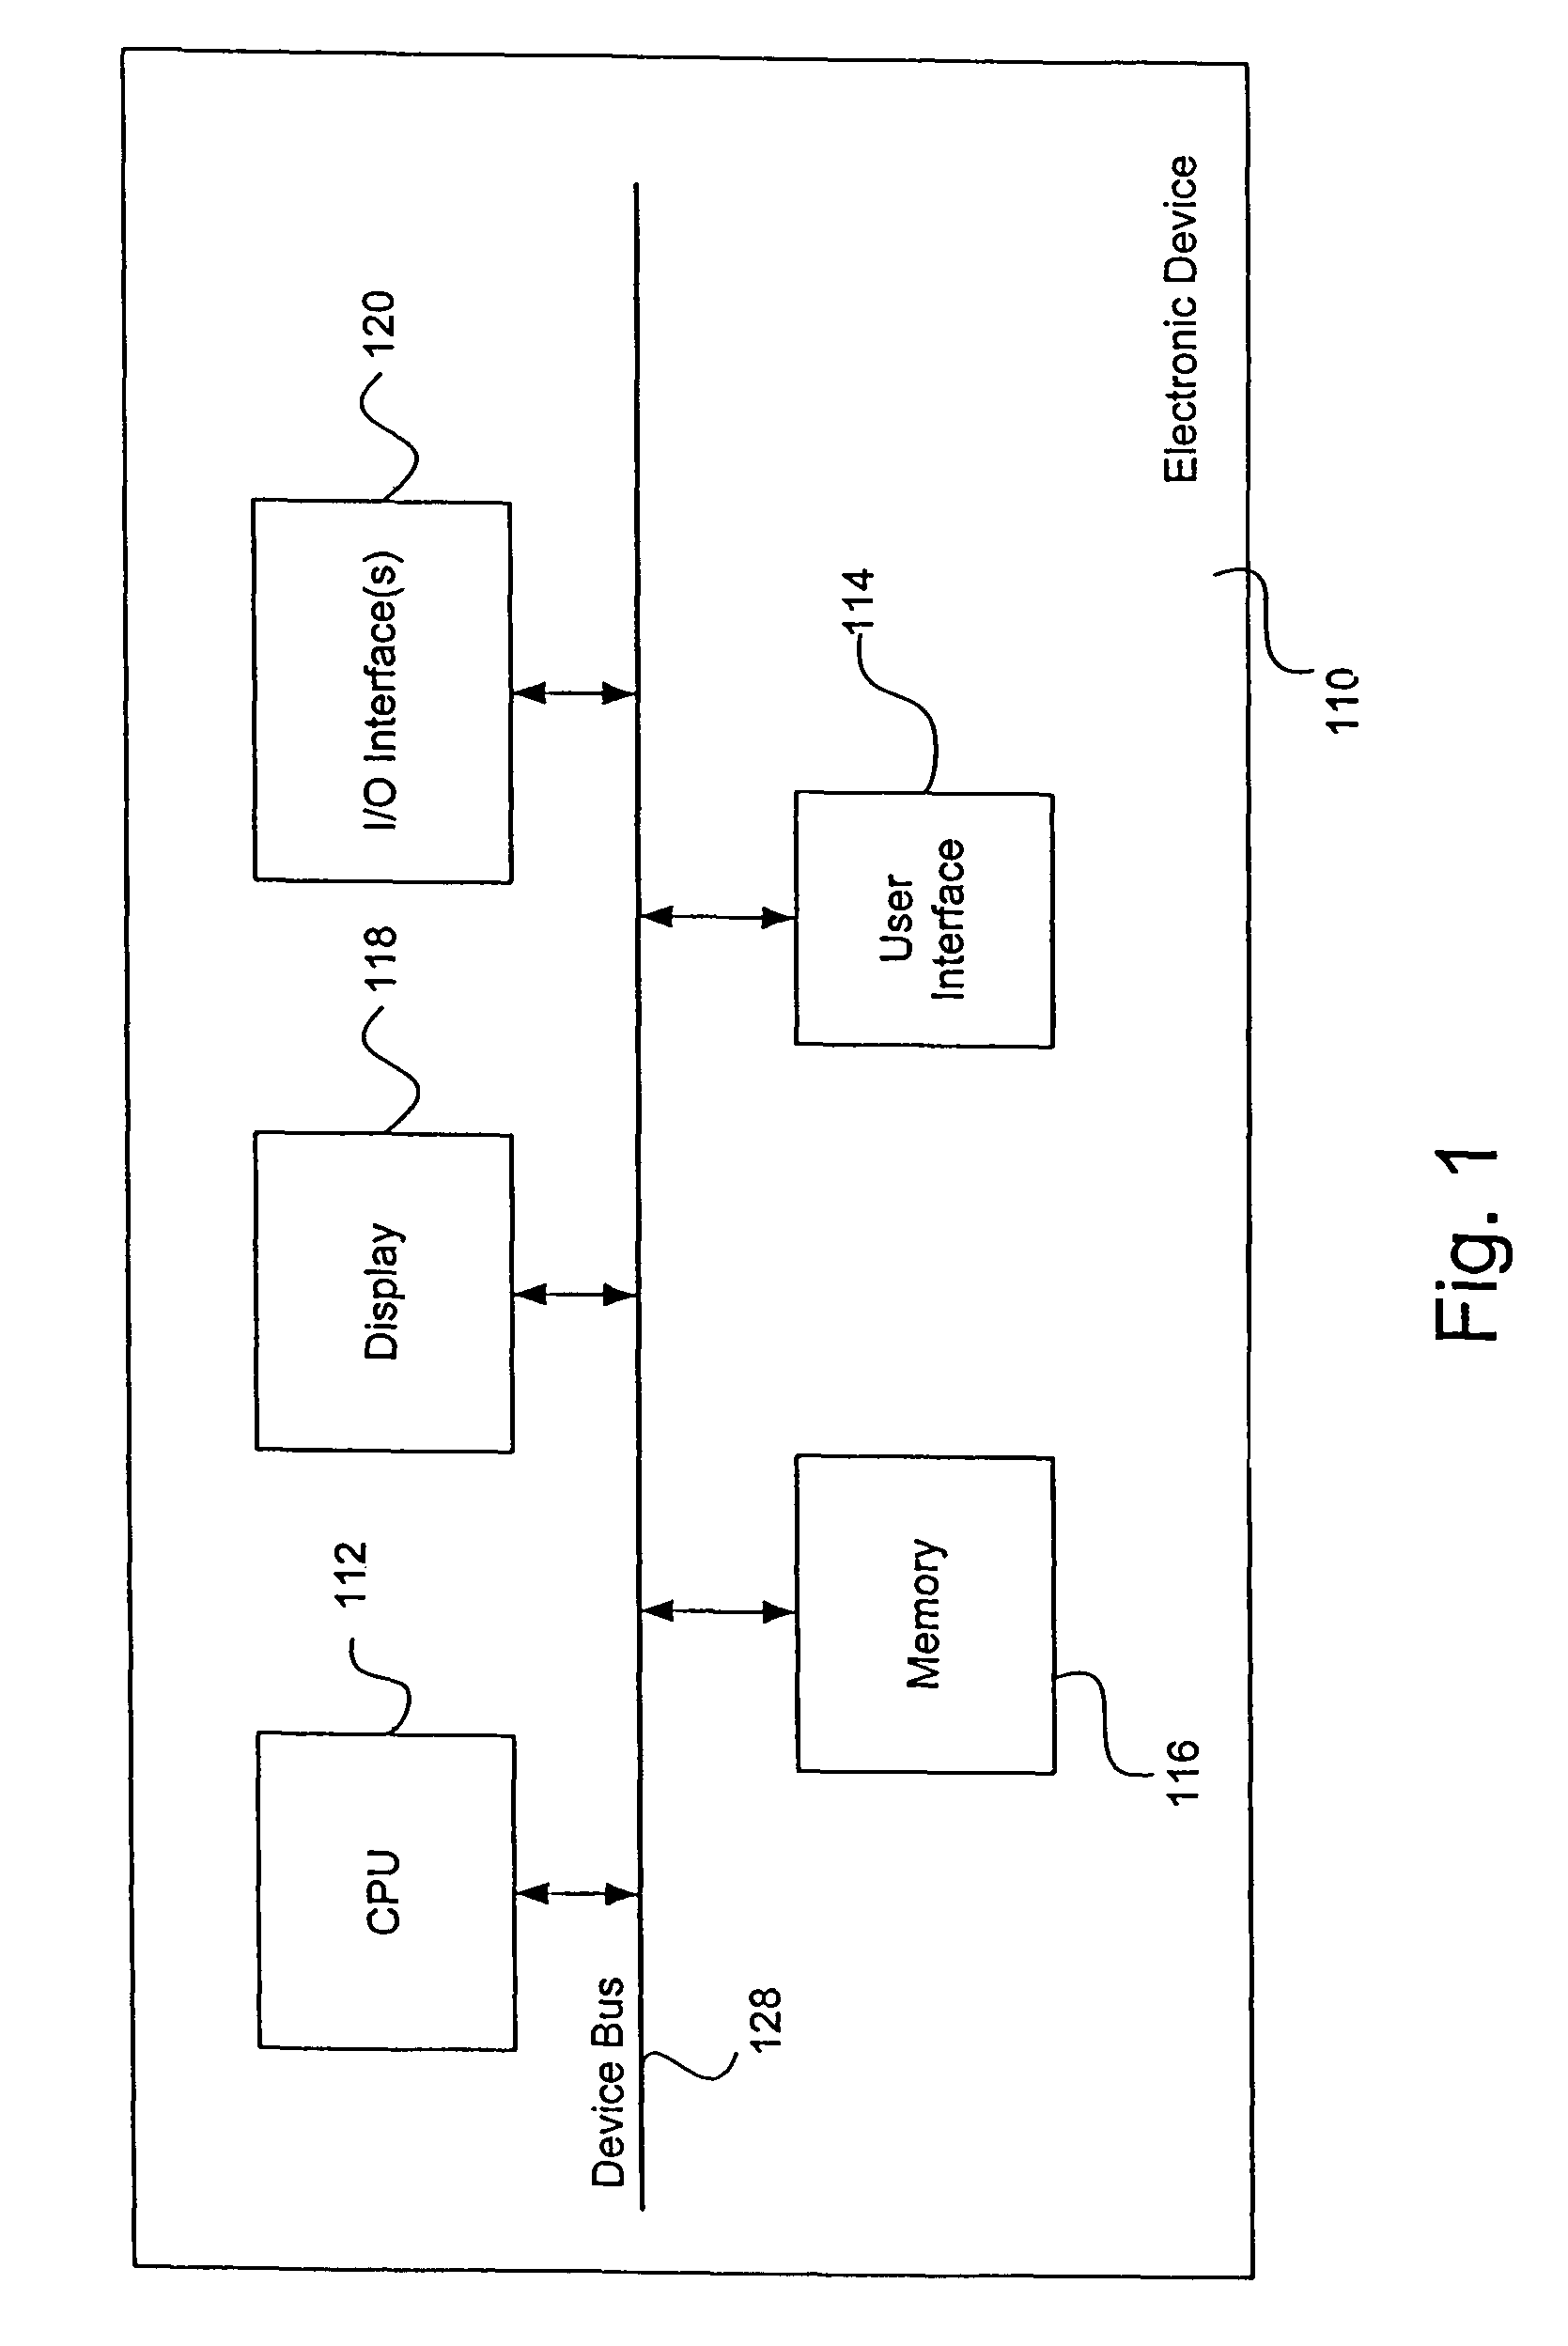 System and method for effectively performing an adaptive encoding procedure